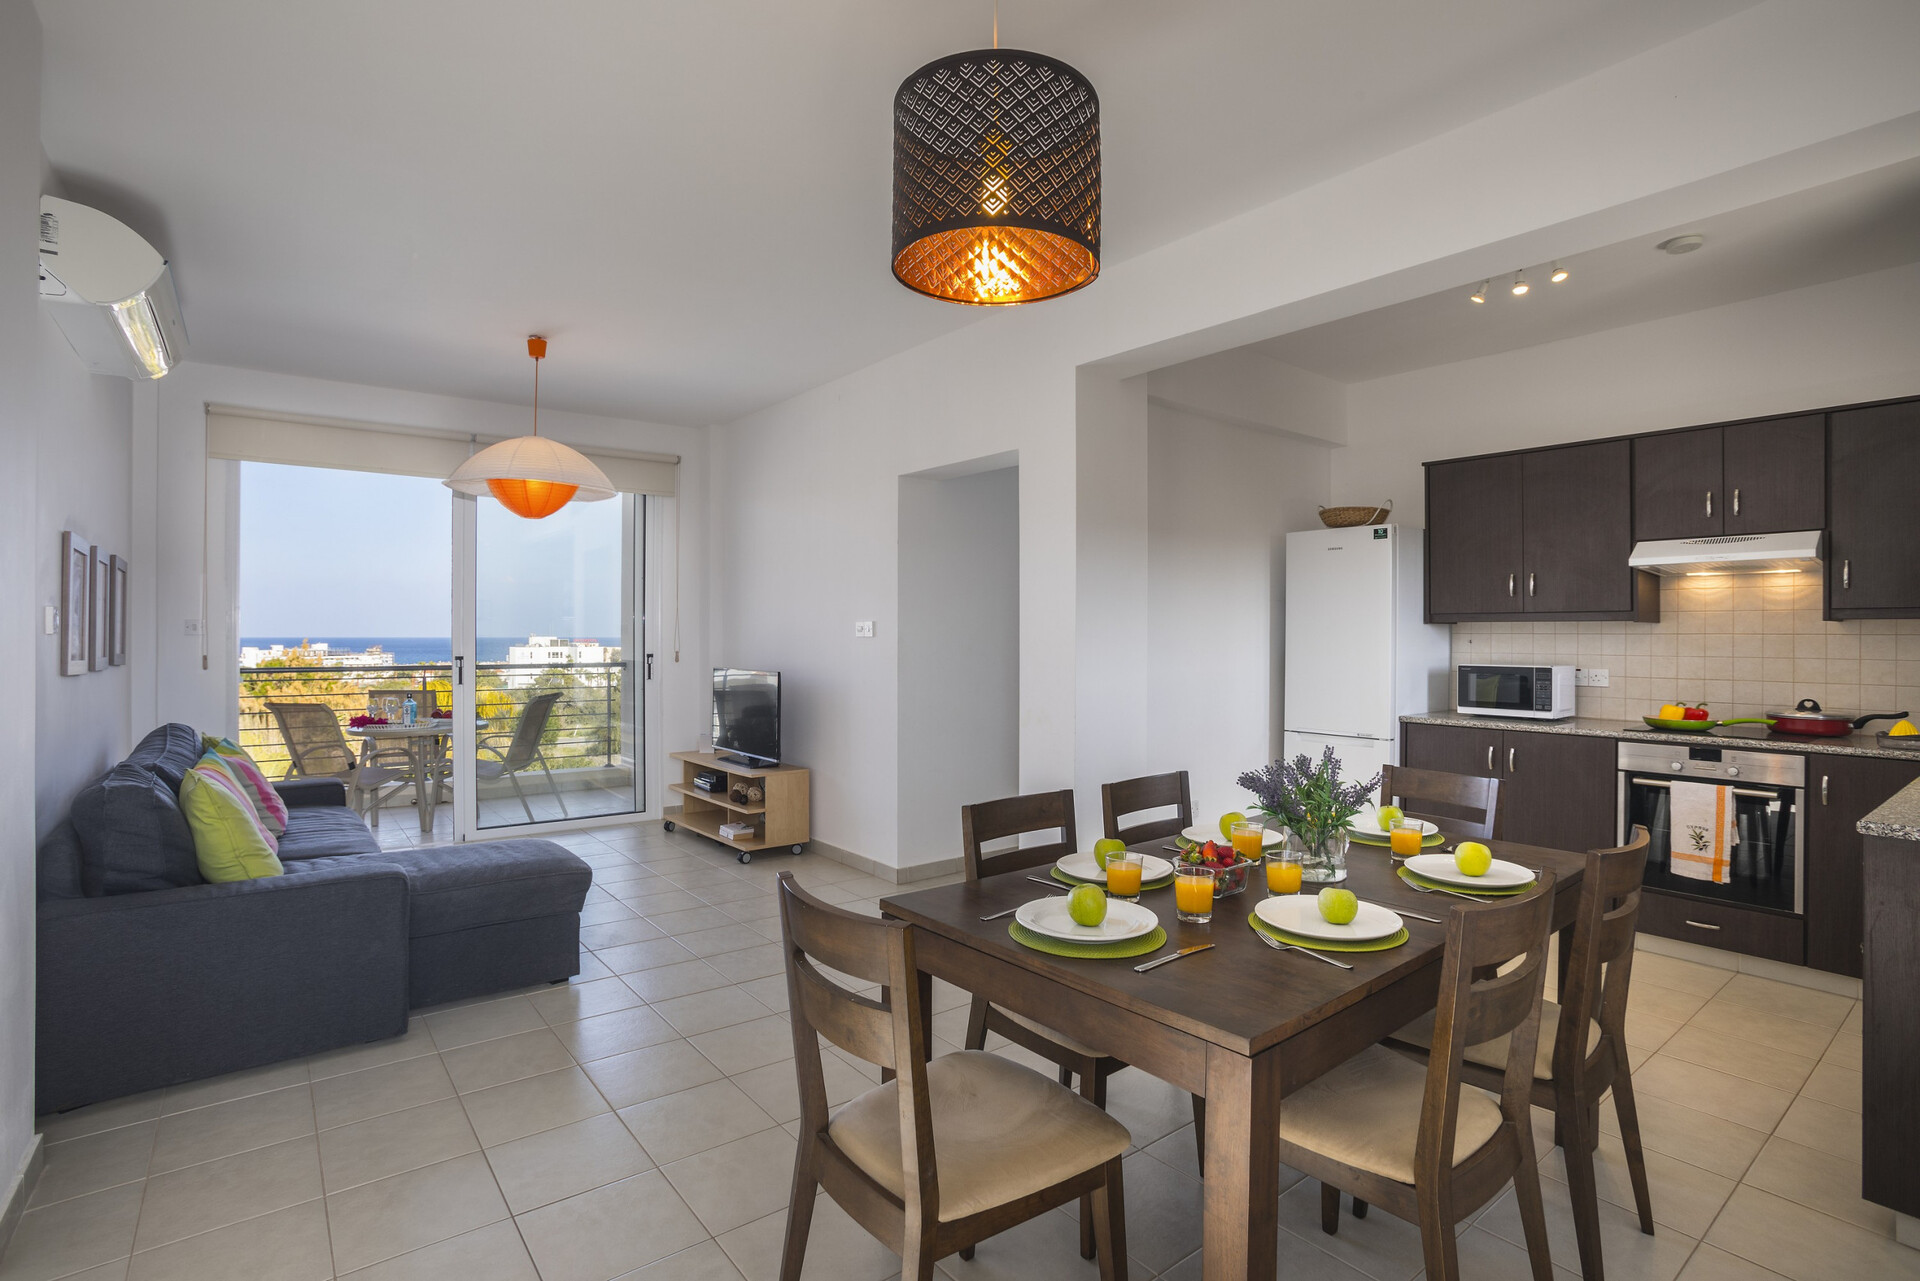 Property Image 1 - Imagine You and Your Family Renting this Perfect Holiday Apartment minutes from the beach, Protaras Apartm